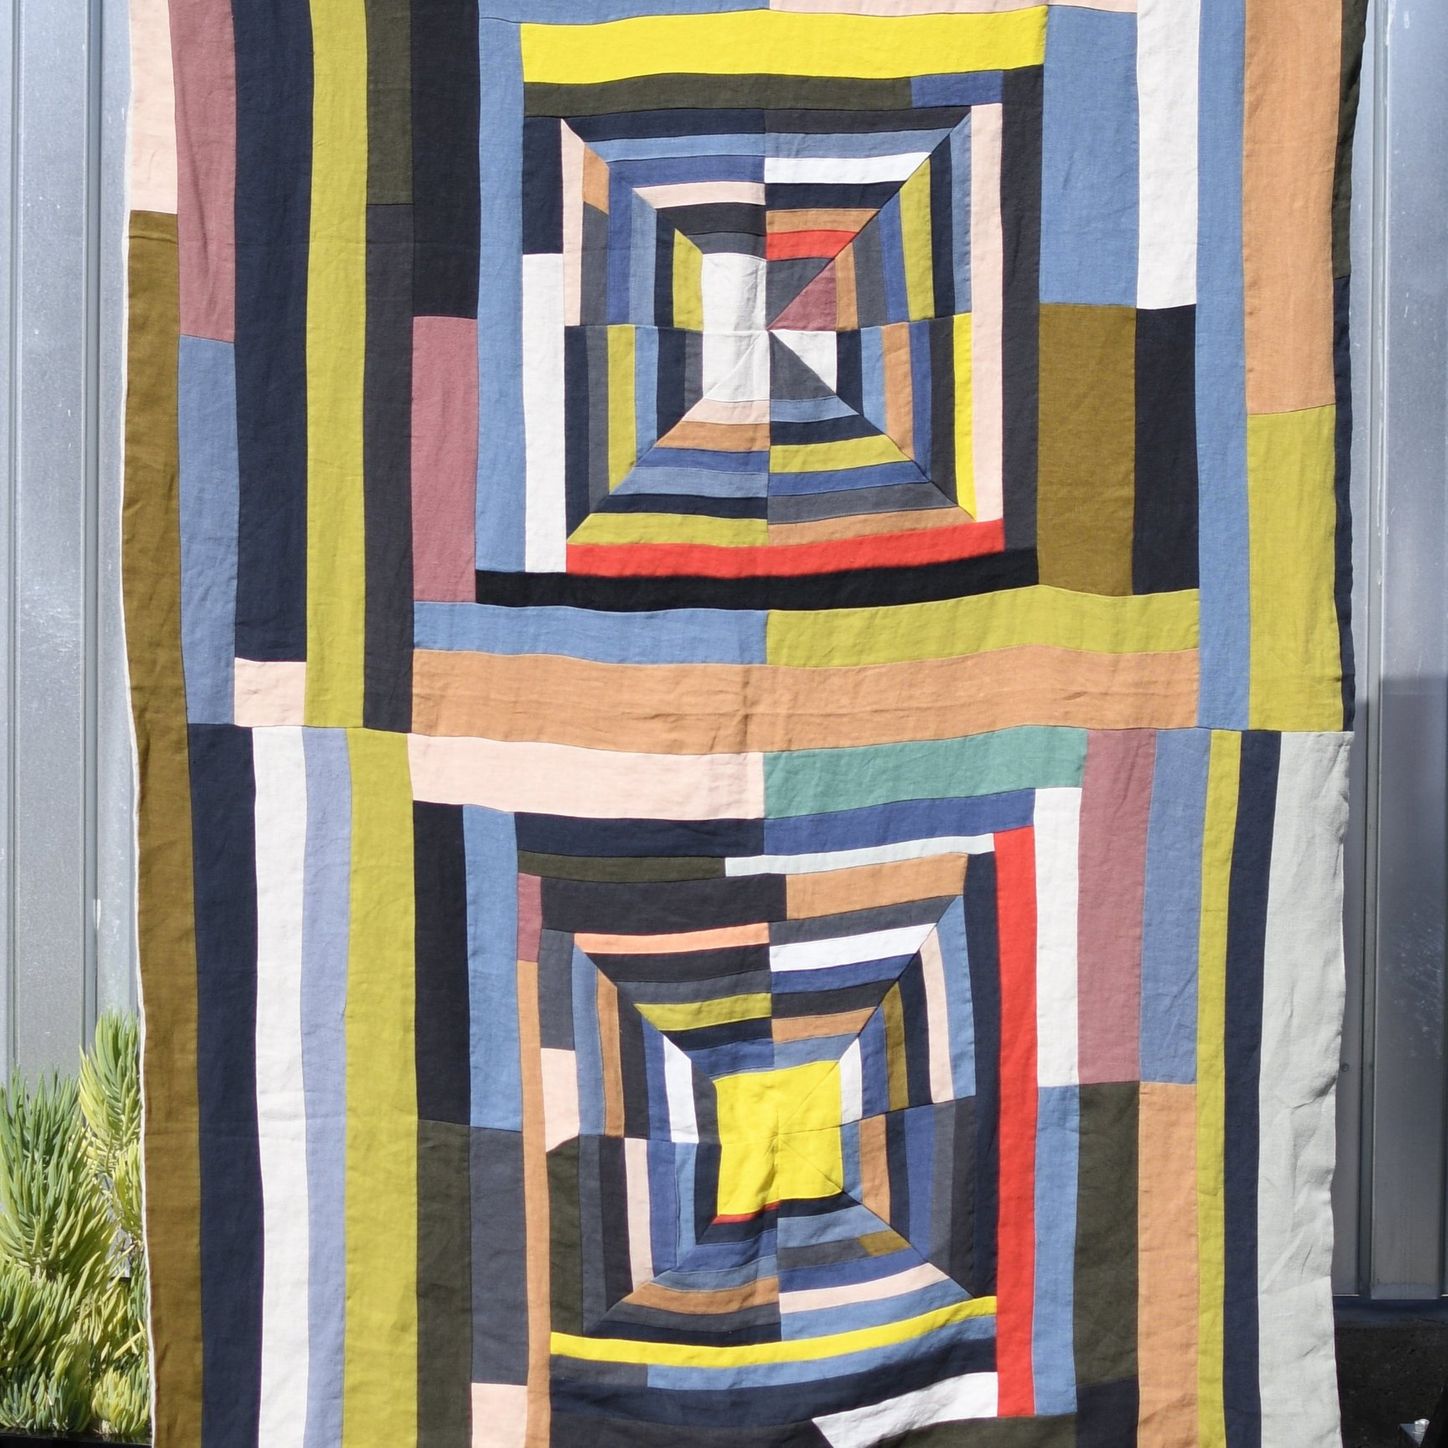 The 10 Best Quilt Makers Near Me (with Free Estimates)